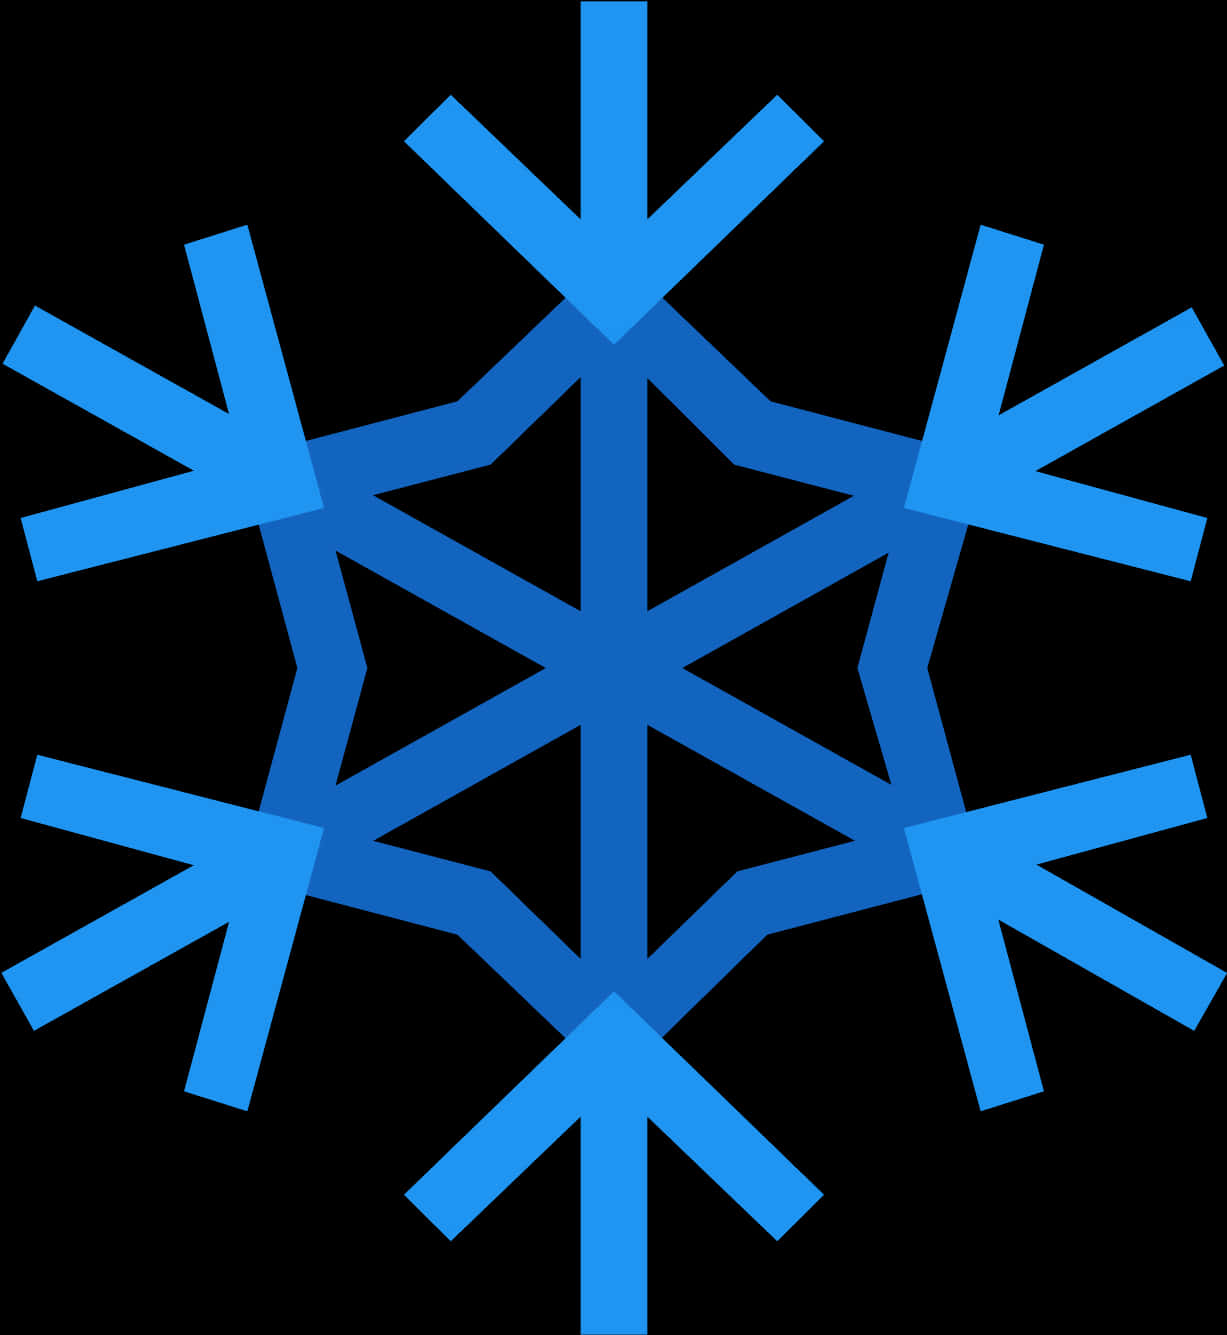 A Blue Snowflake With Arrows